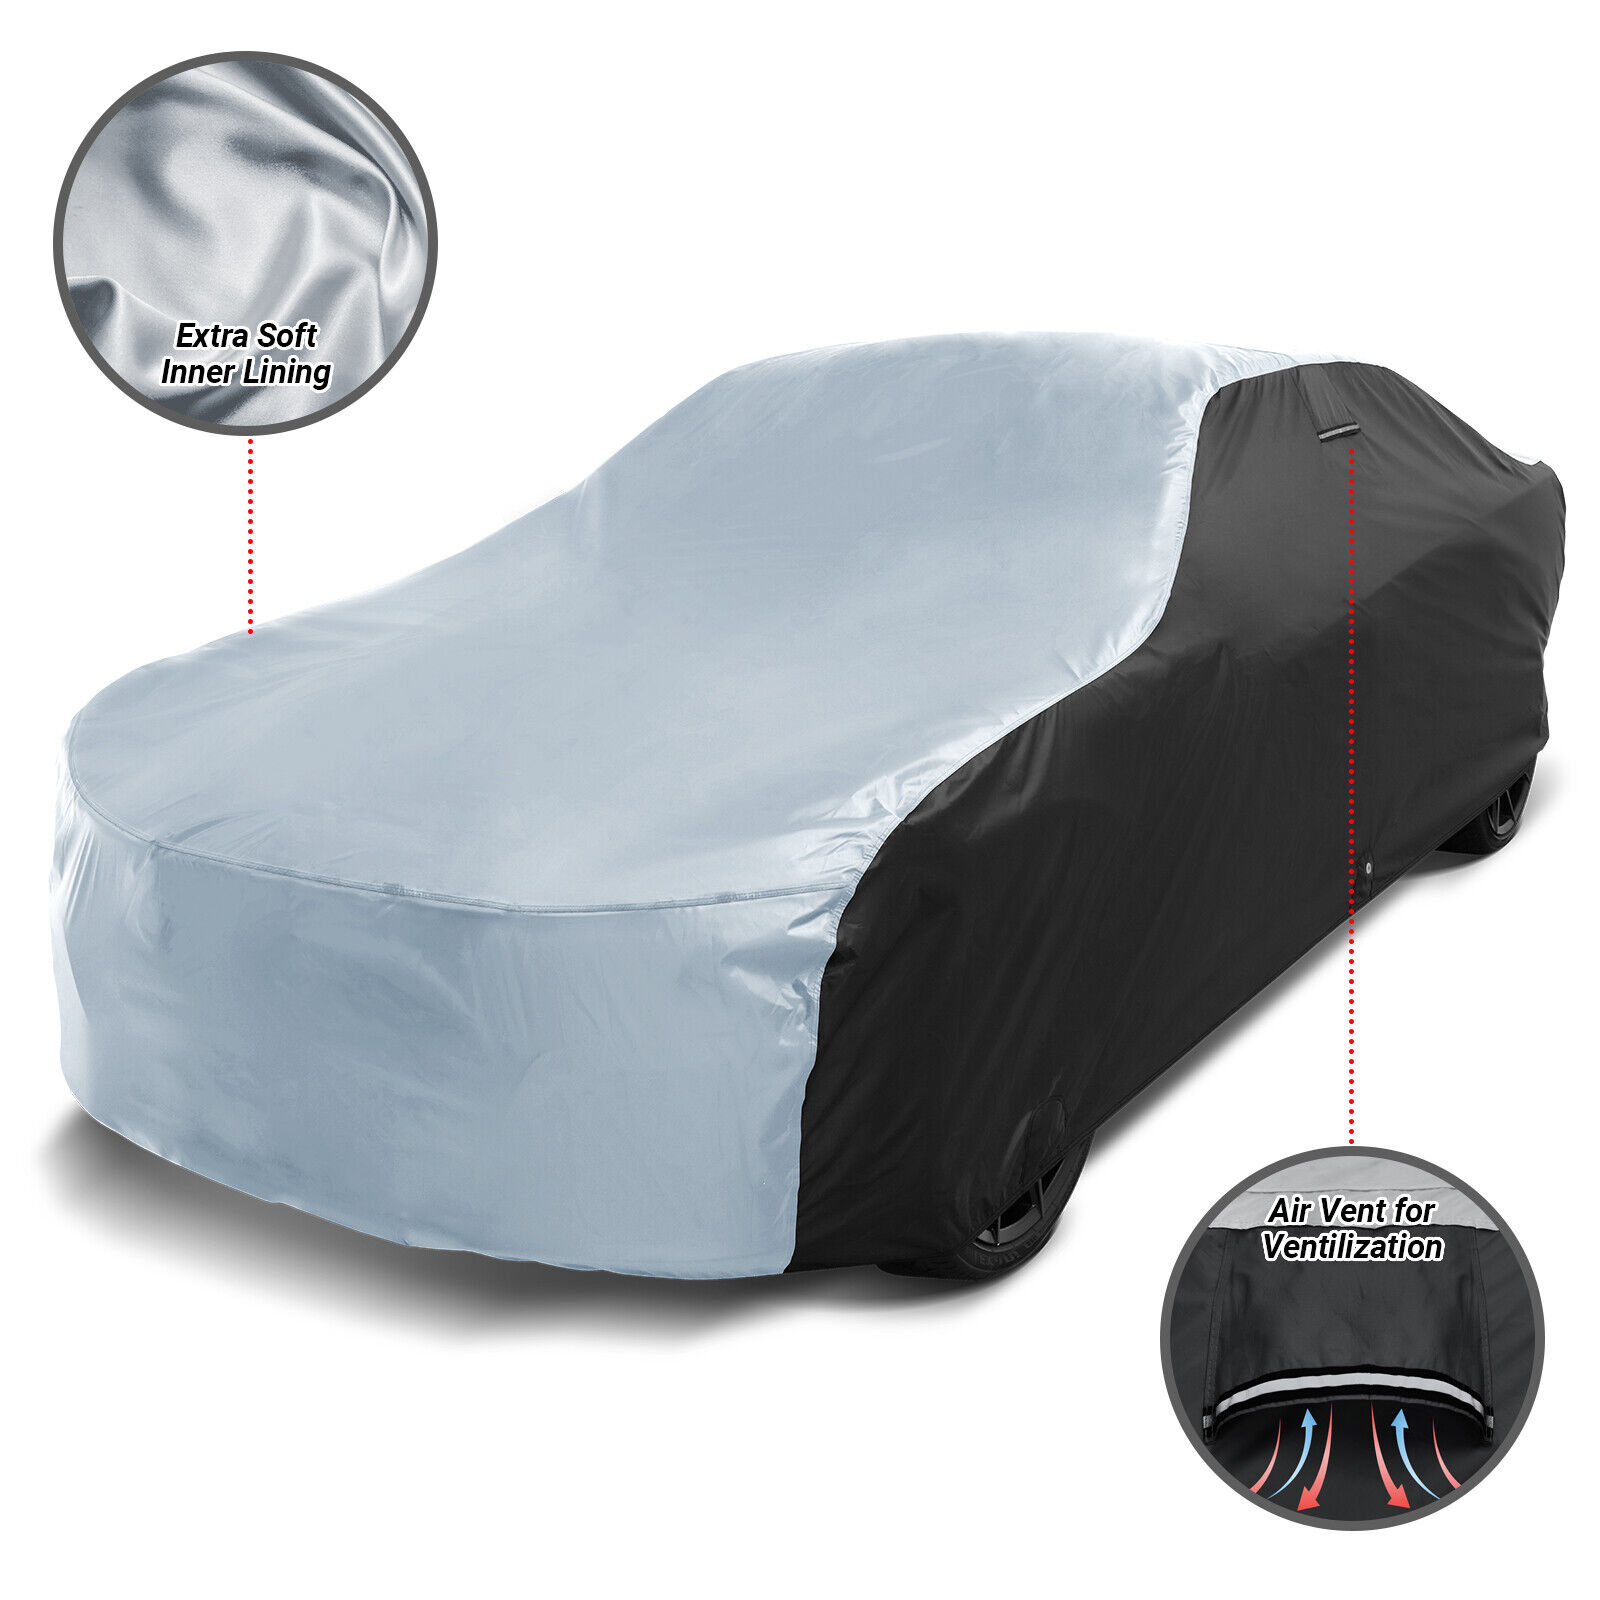 For PACKARD [CAVALIER] Custom-Fit Outdoor Waterproof All Weather Car Cover